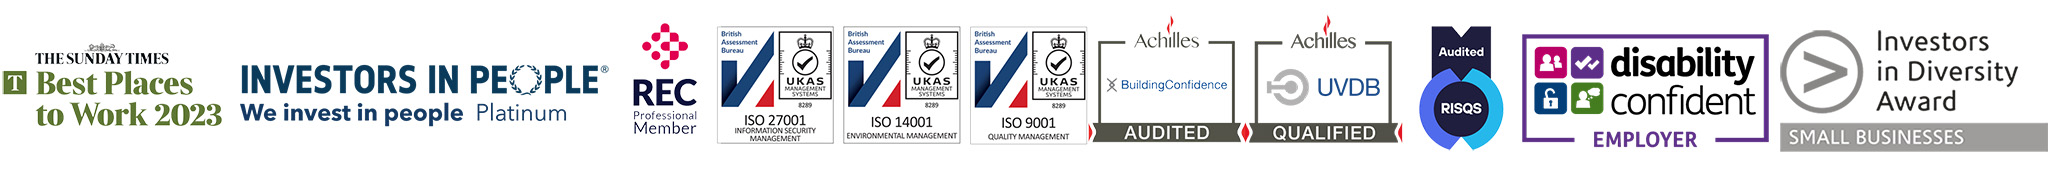 Various Recruitment and Employment awards and accreditations in a row